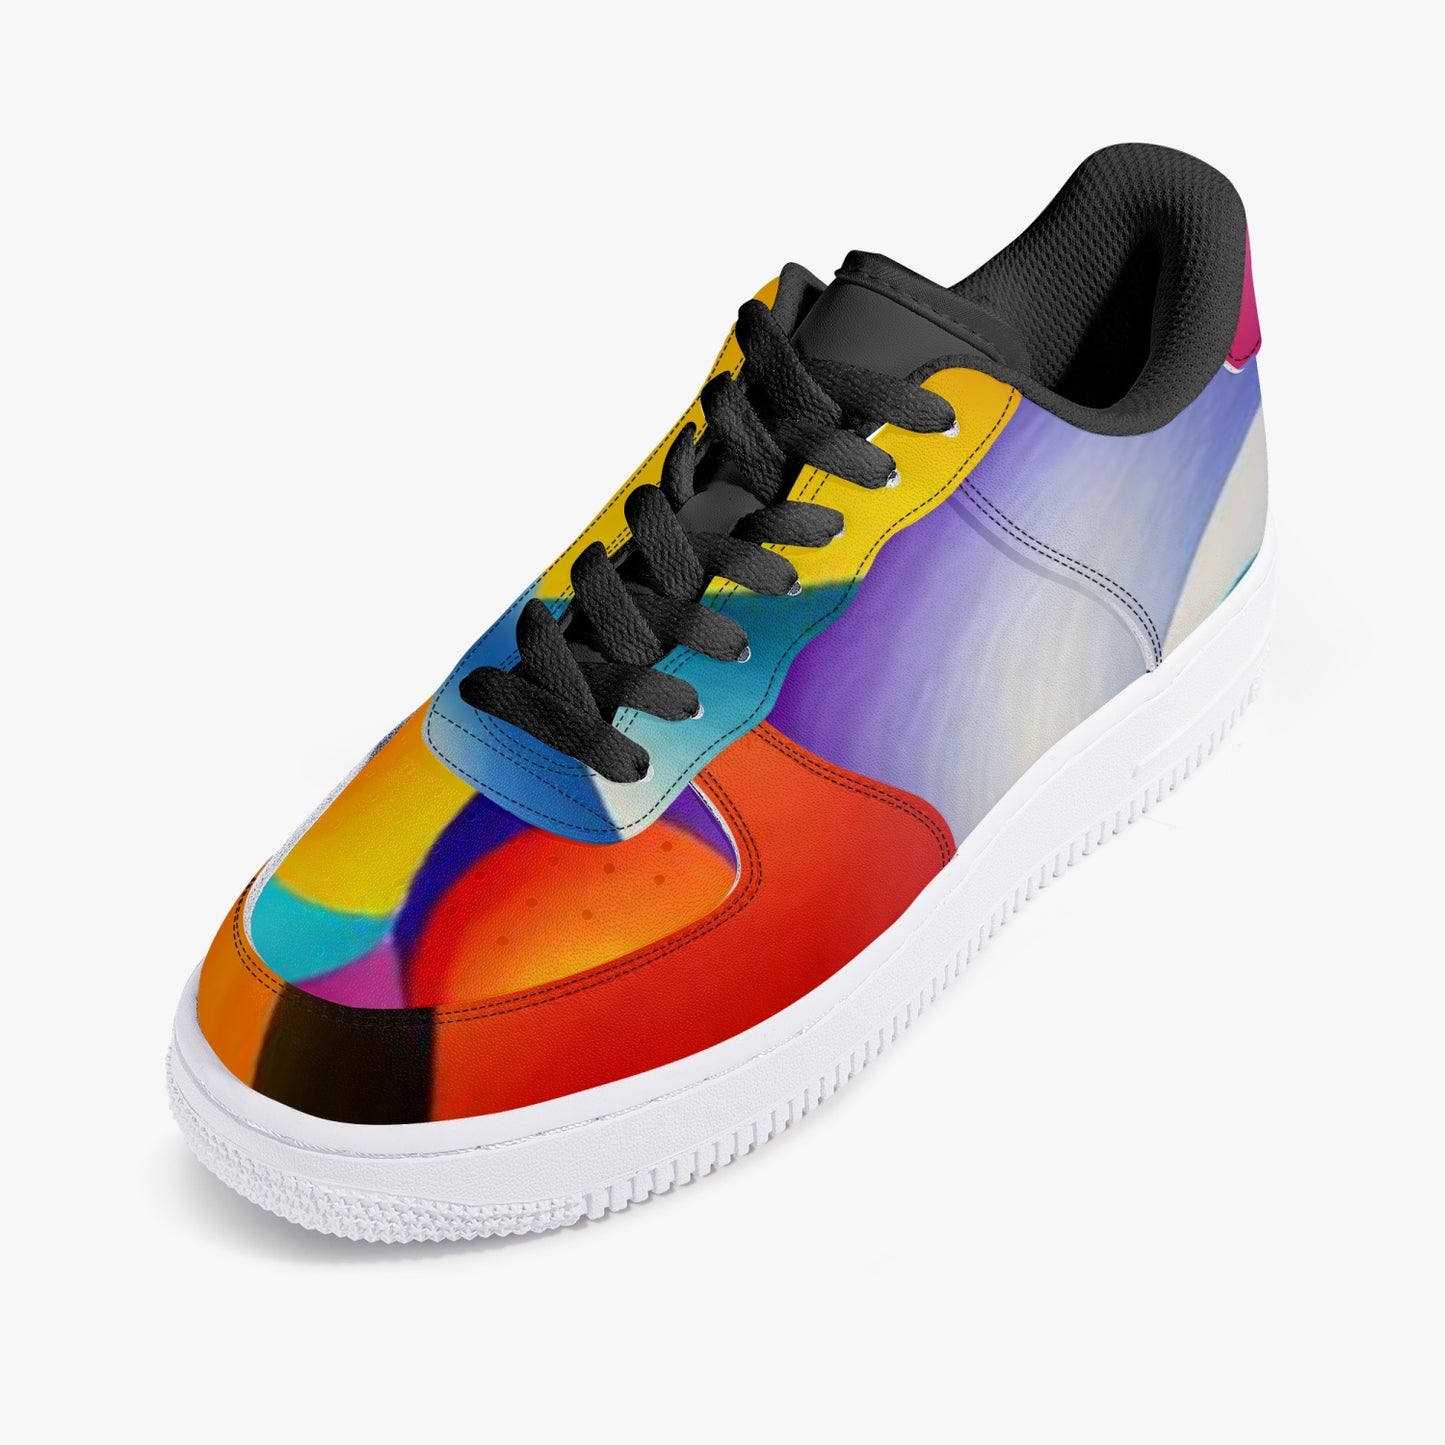 PoM's leather collection - Black Low-Top Leather Sports Sneakers (unique abstract Art print)